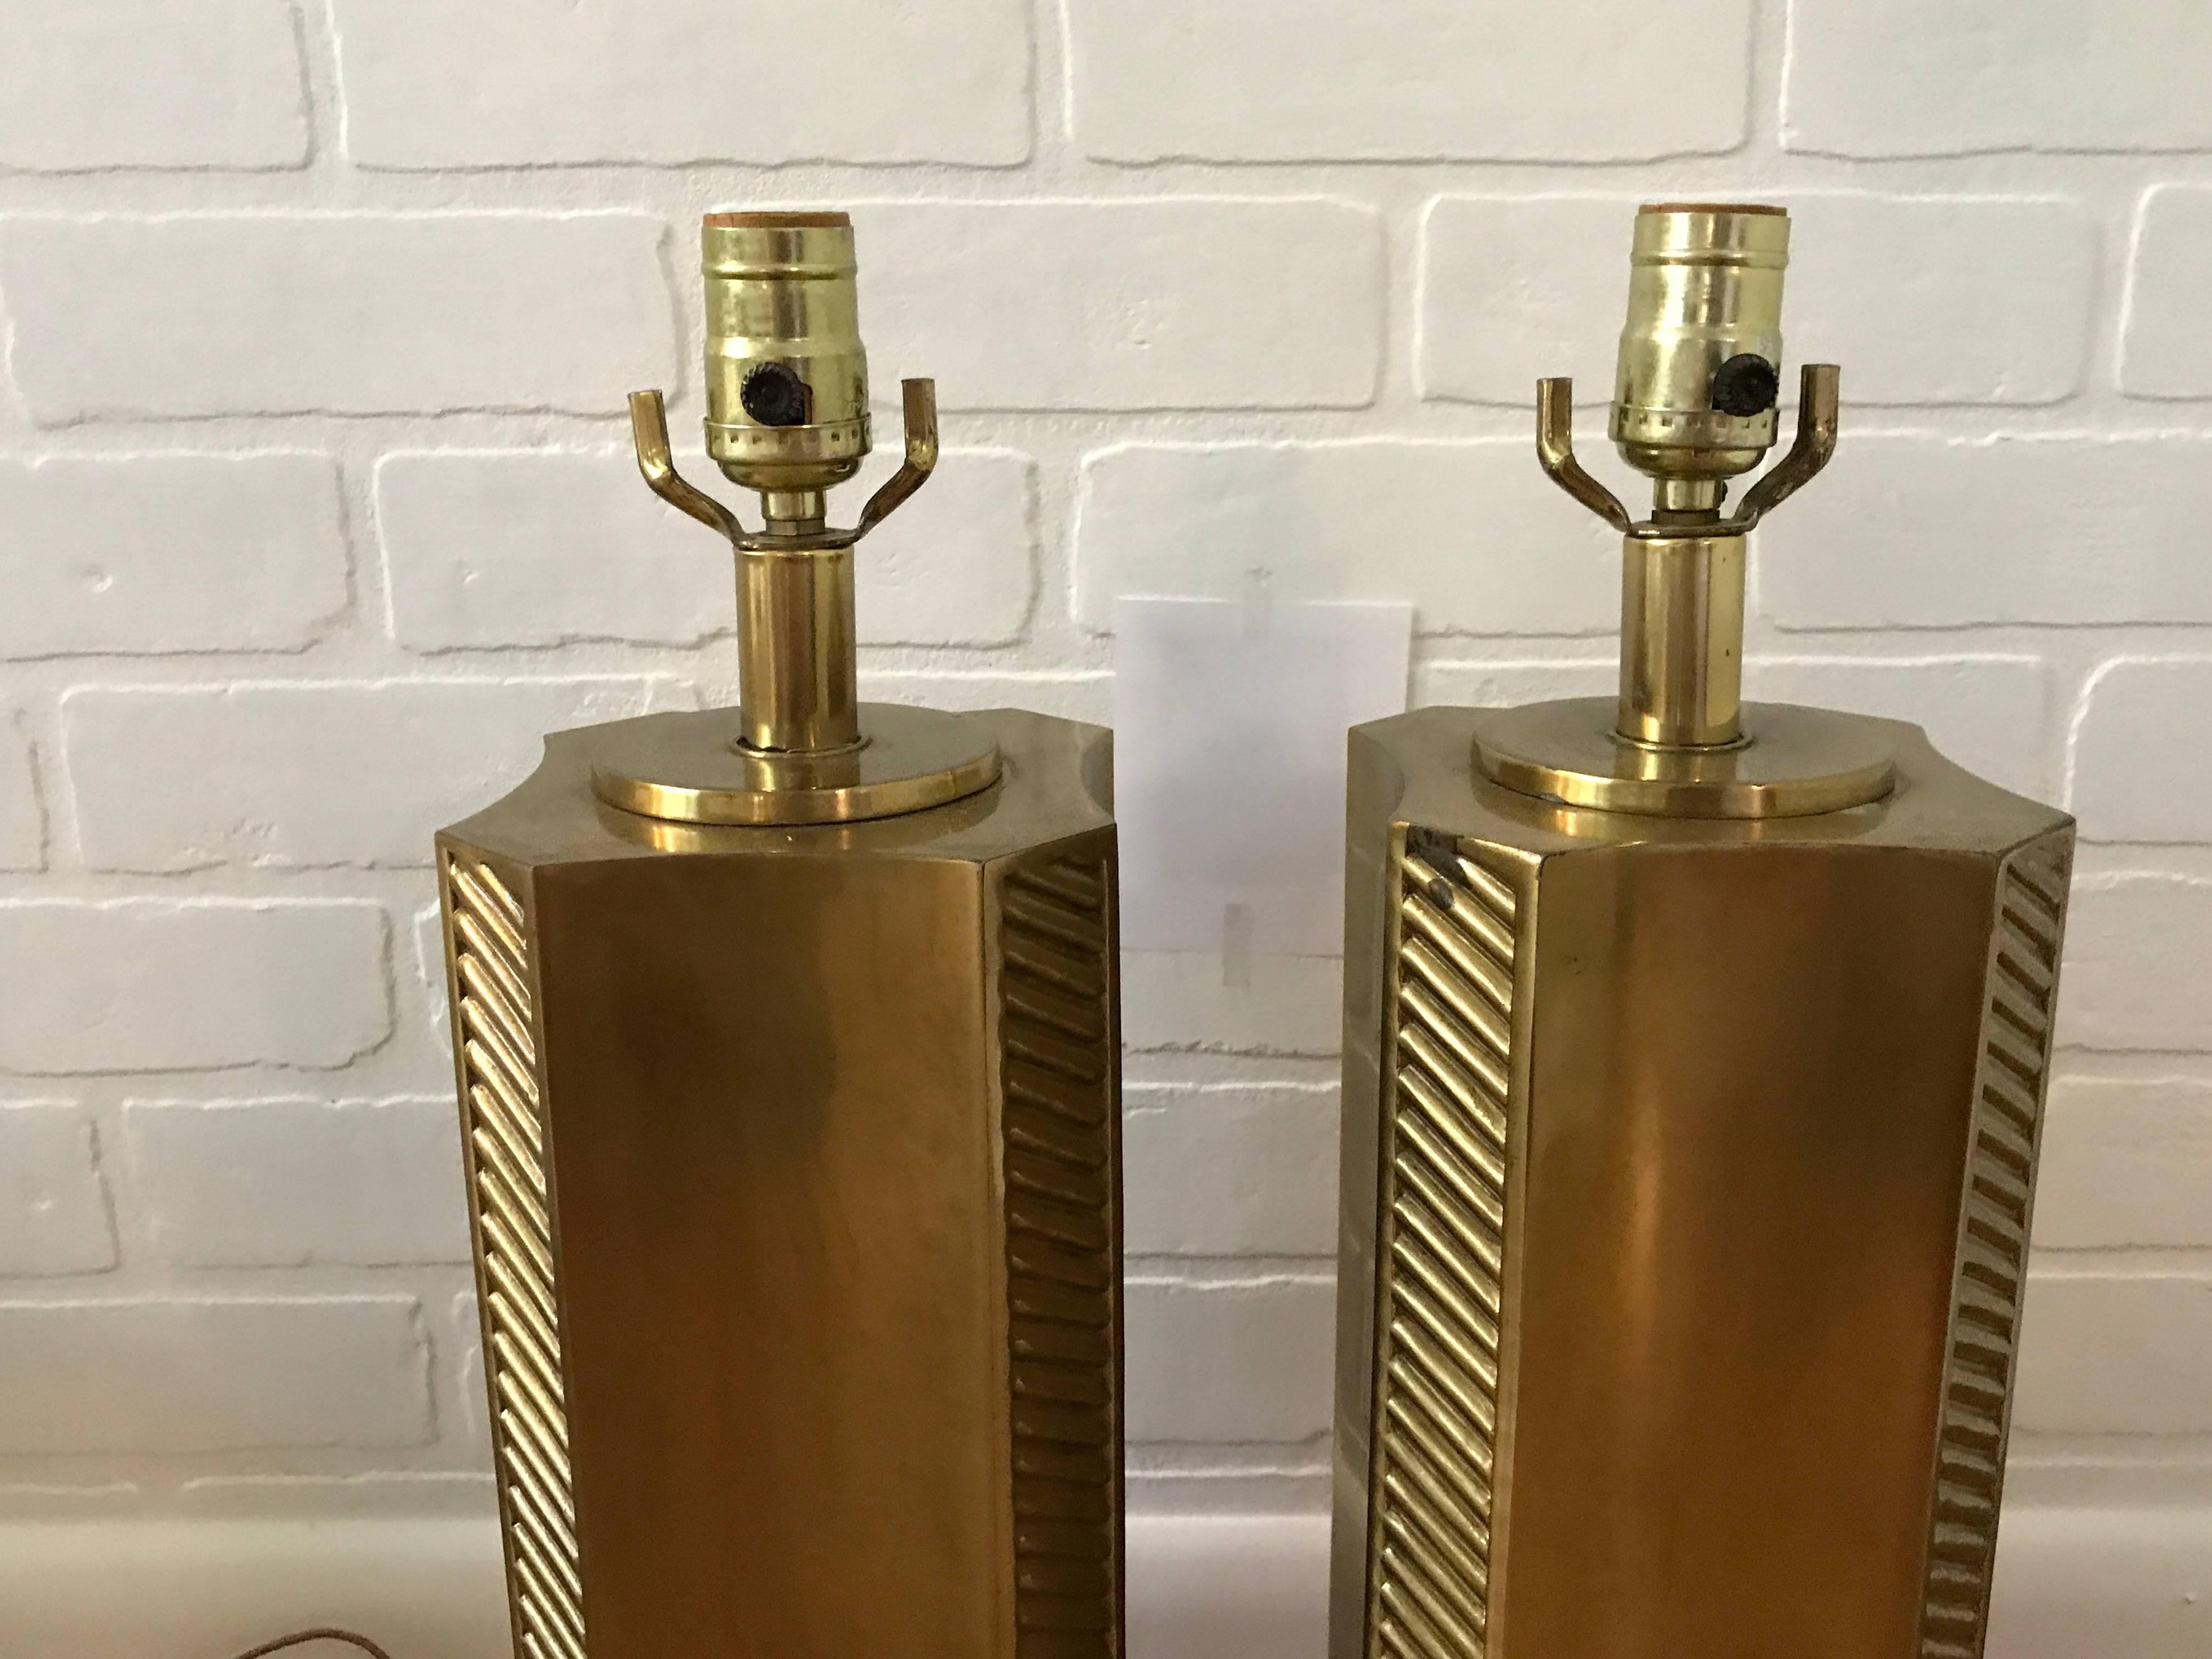 Offered is a stunning pair of 1960s Italian brass column lamps. Hollowed inside, heavy-thick brass.